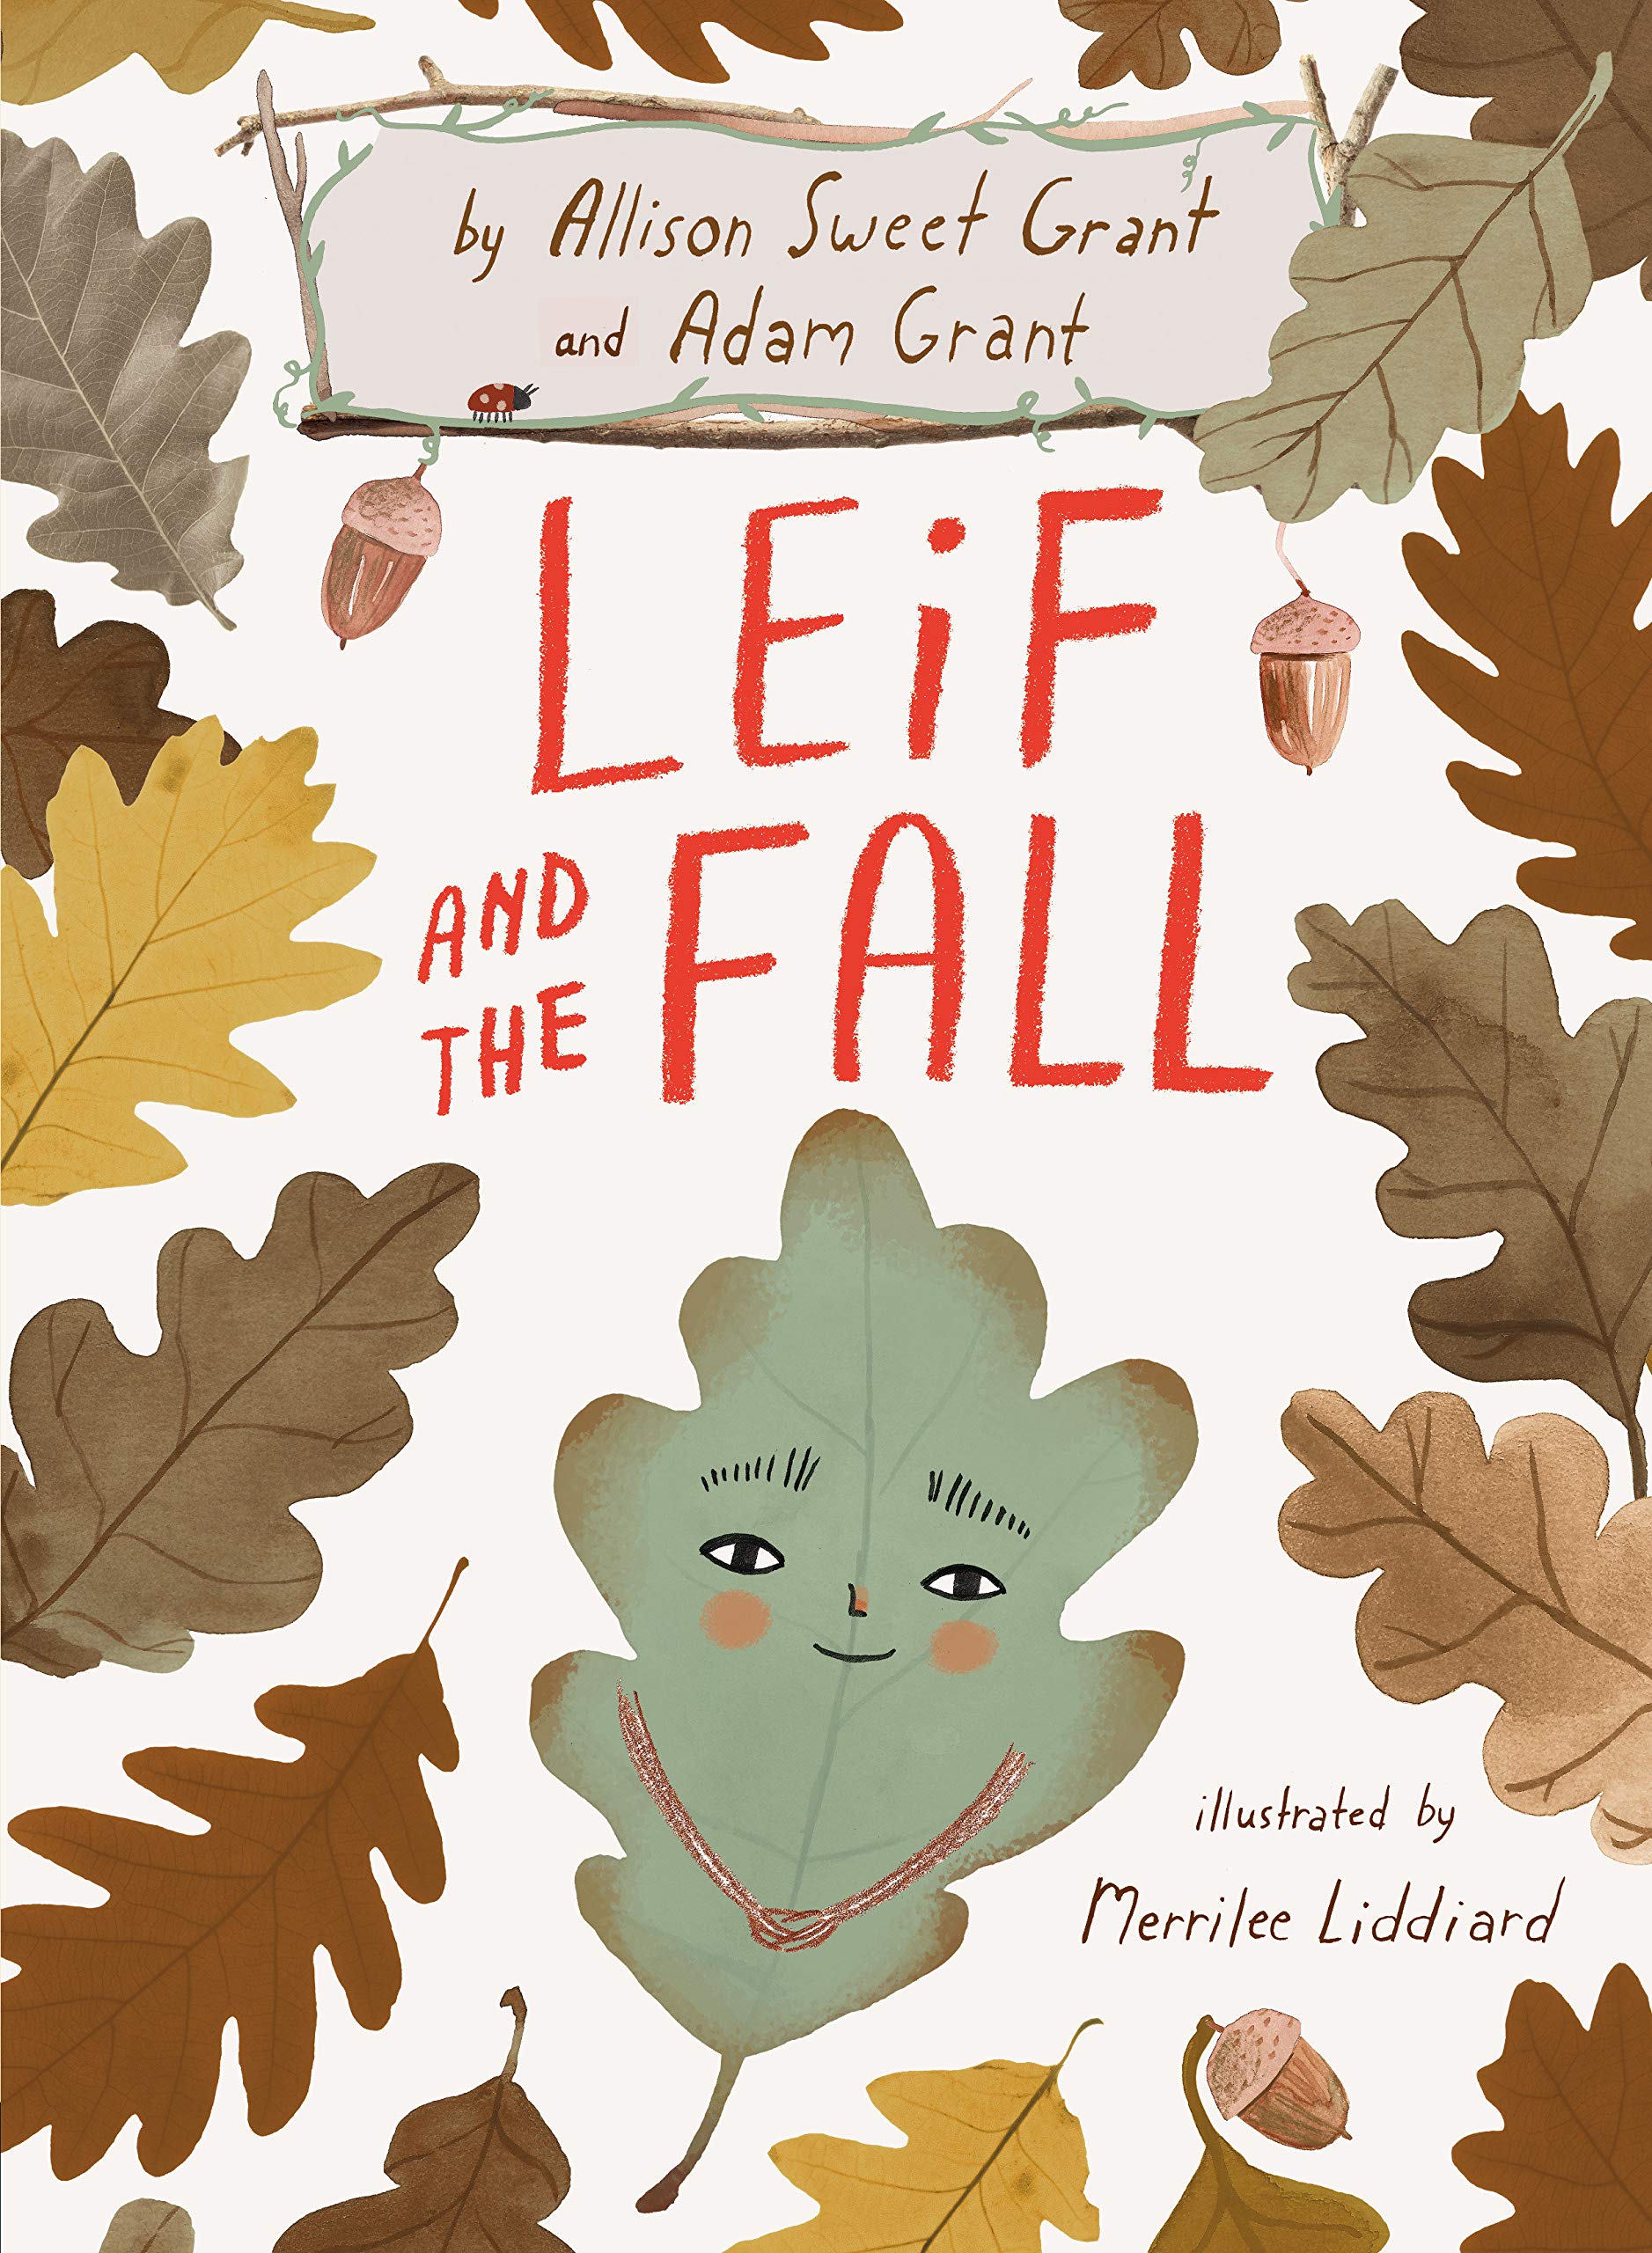 speech and language teaching concepts for Leif and the Fall in speech therapy​ ​